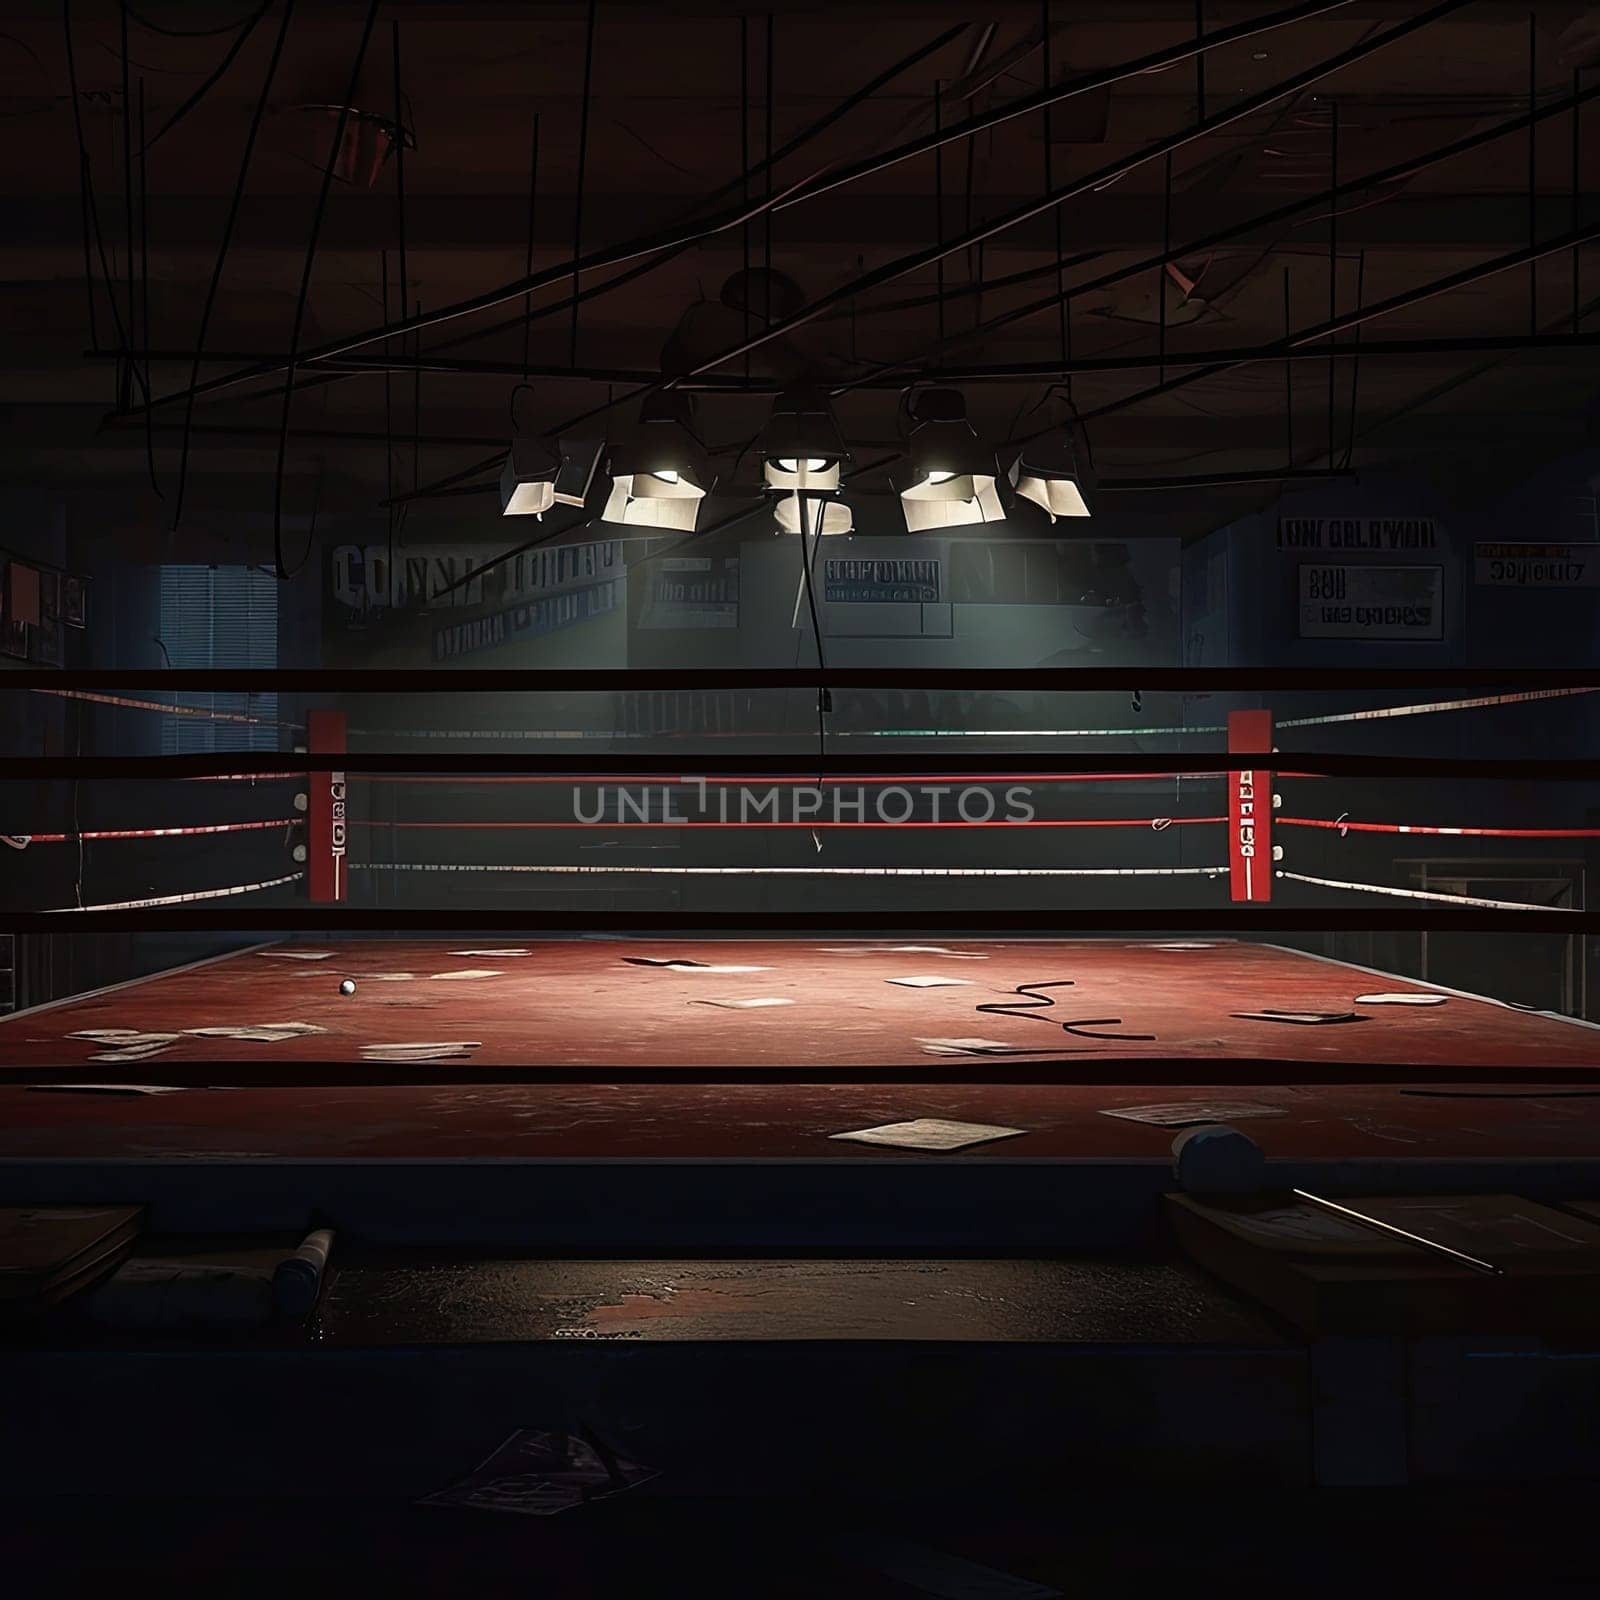 A boxing ring in a dimly lit room radiates bright lights, evoking the intensity of a fight night.